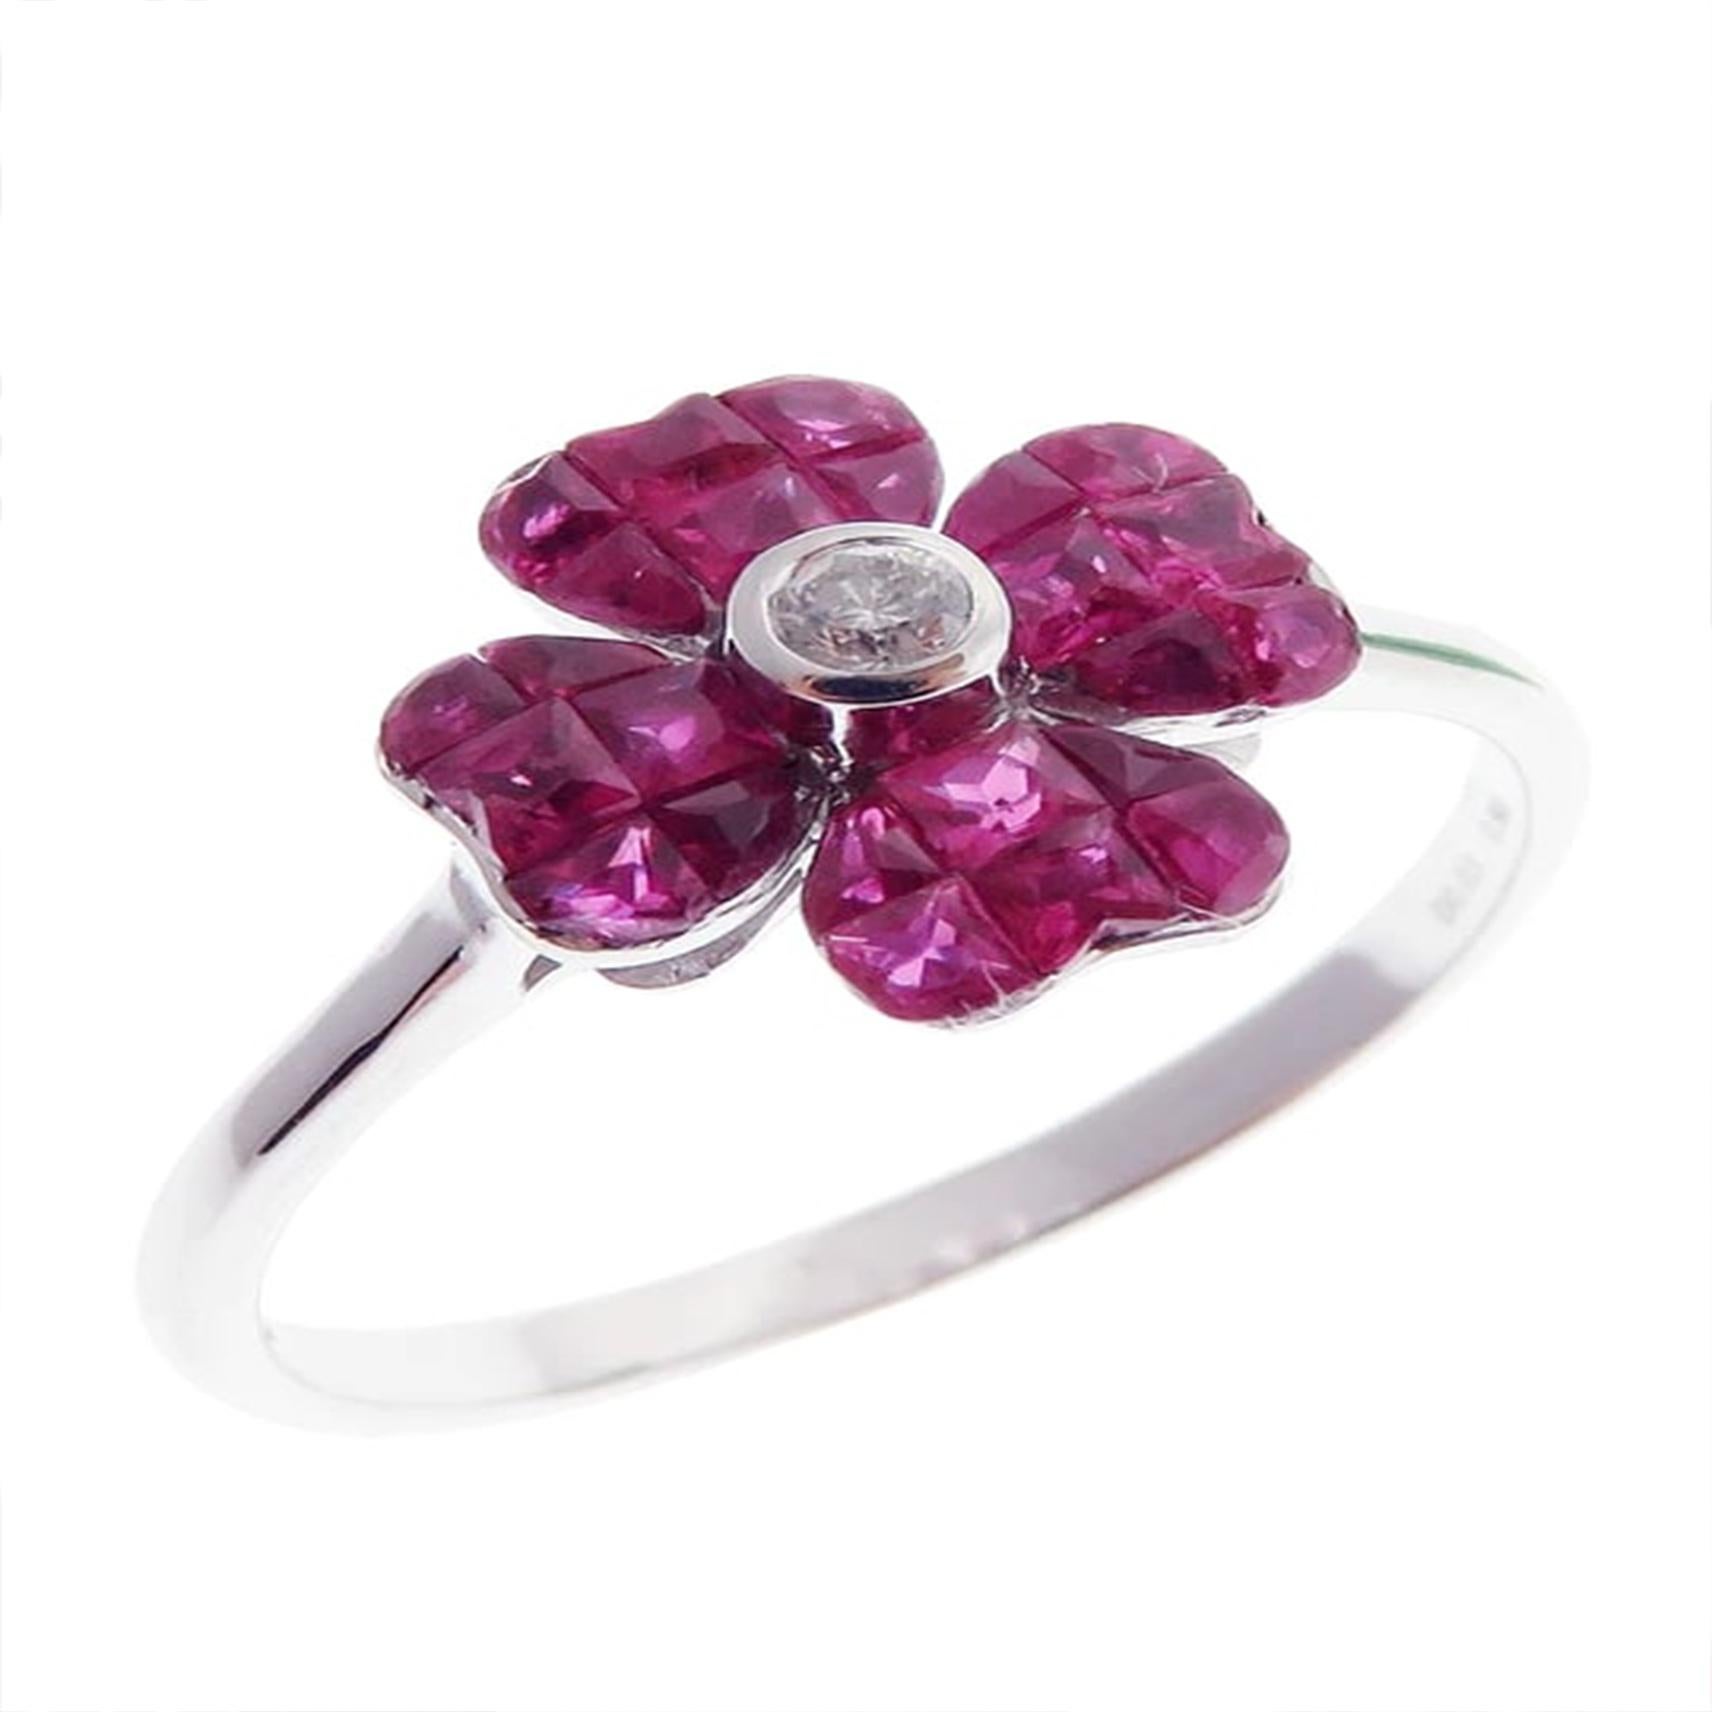 For Sale:  Aries Firey Ruby Flower Ring 3